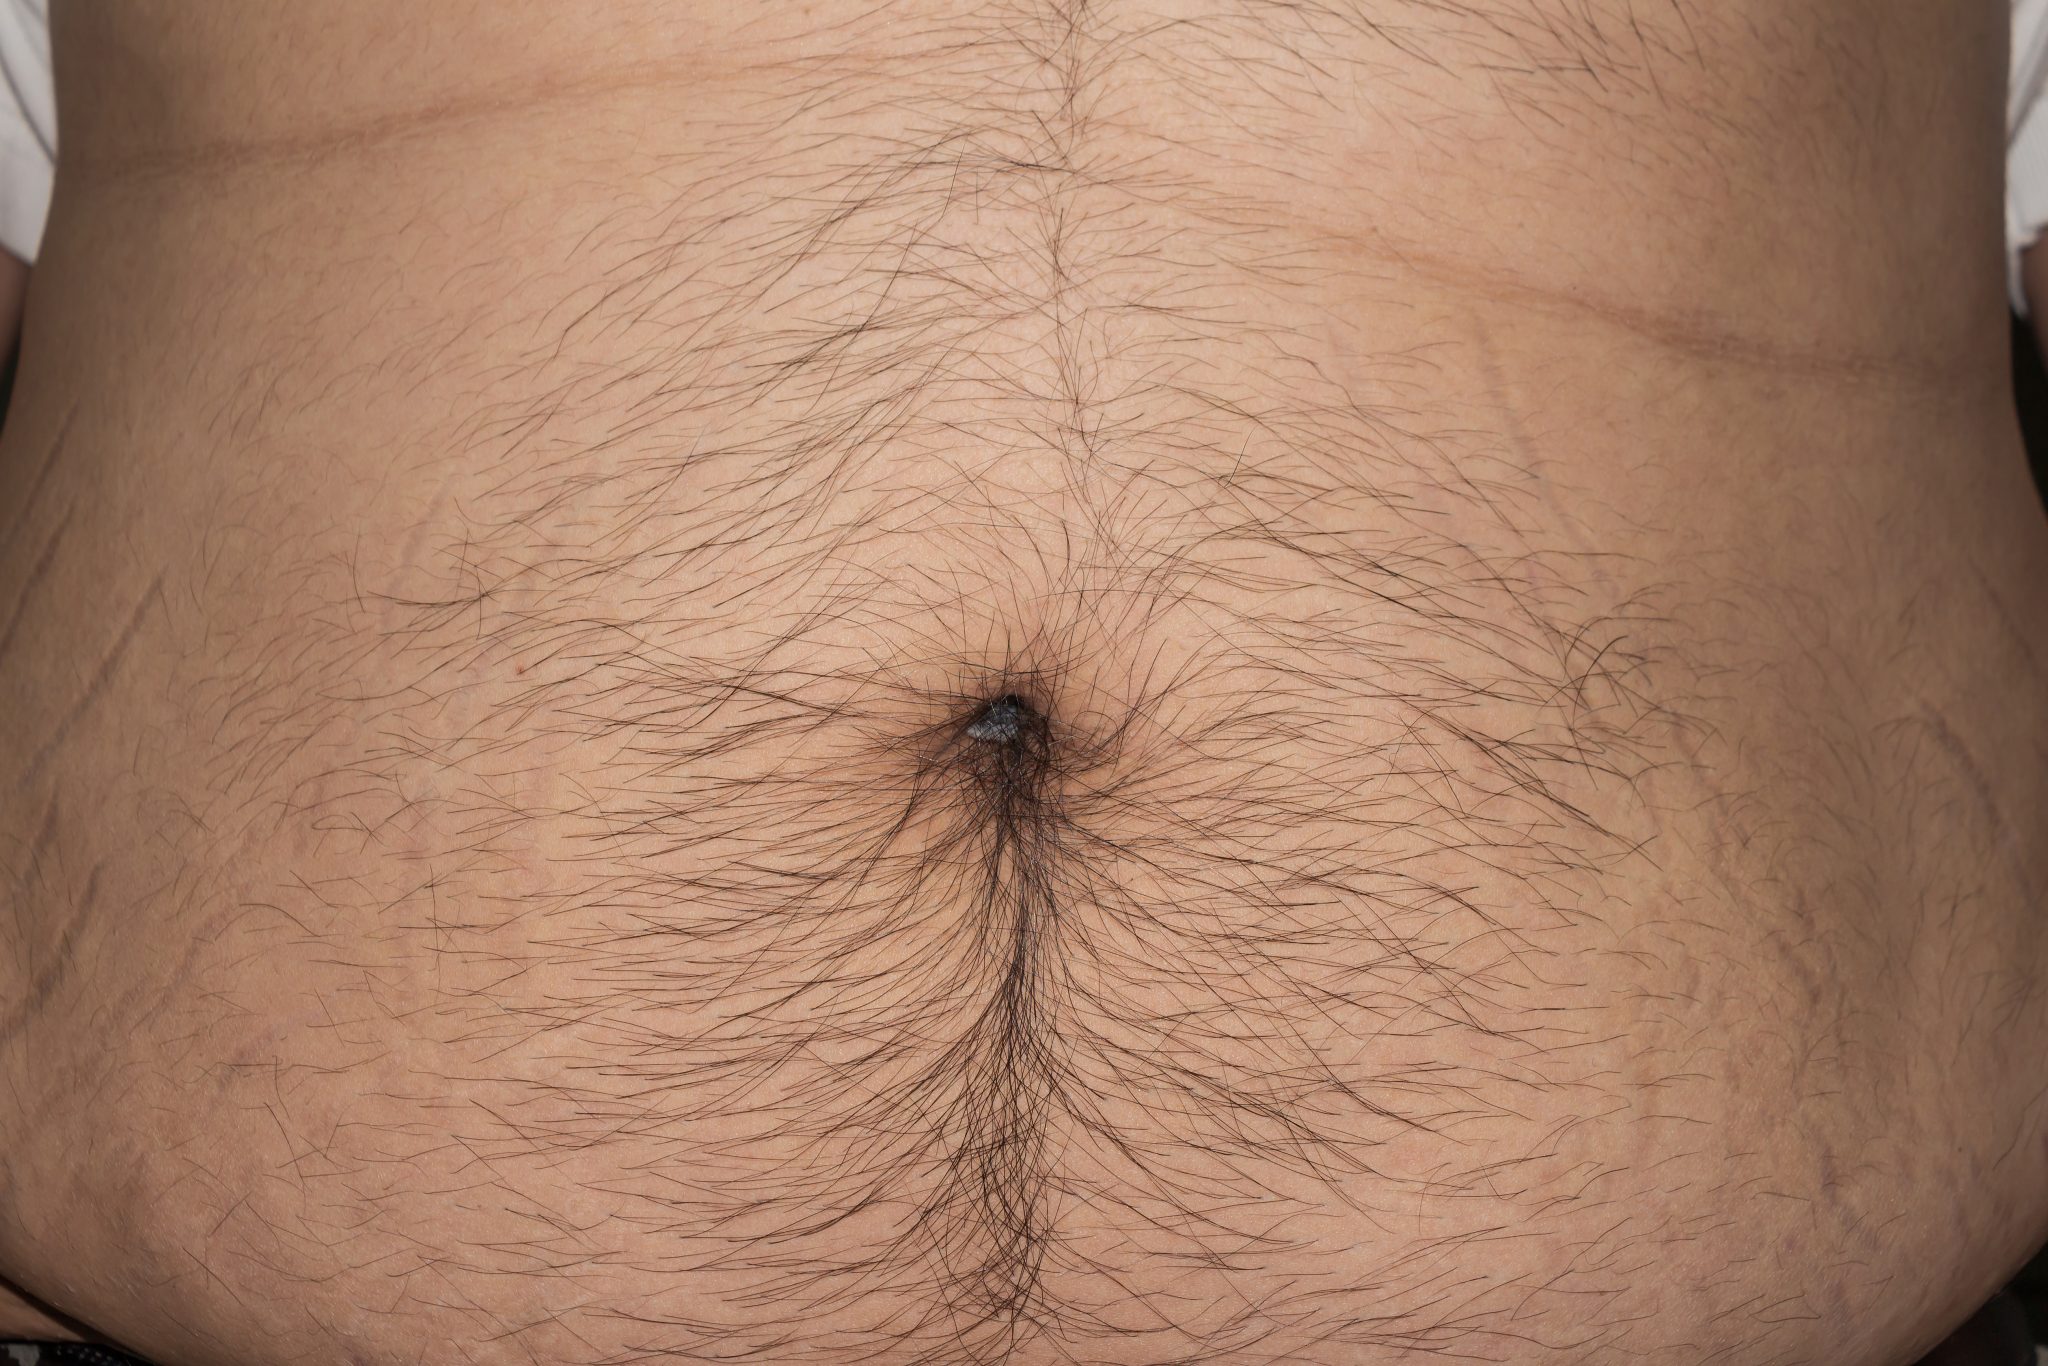 Karl’s research says older men with hairy abdomens are often belly button l...